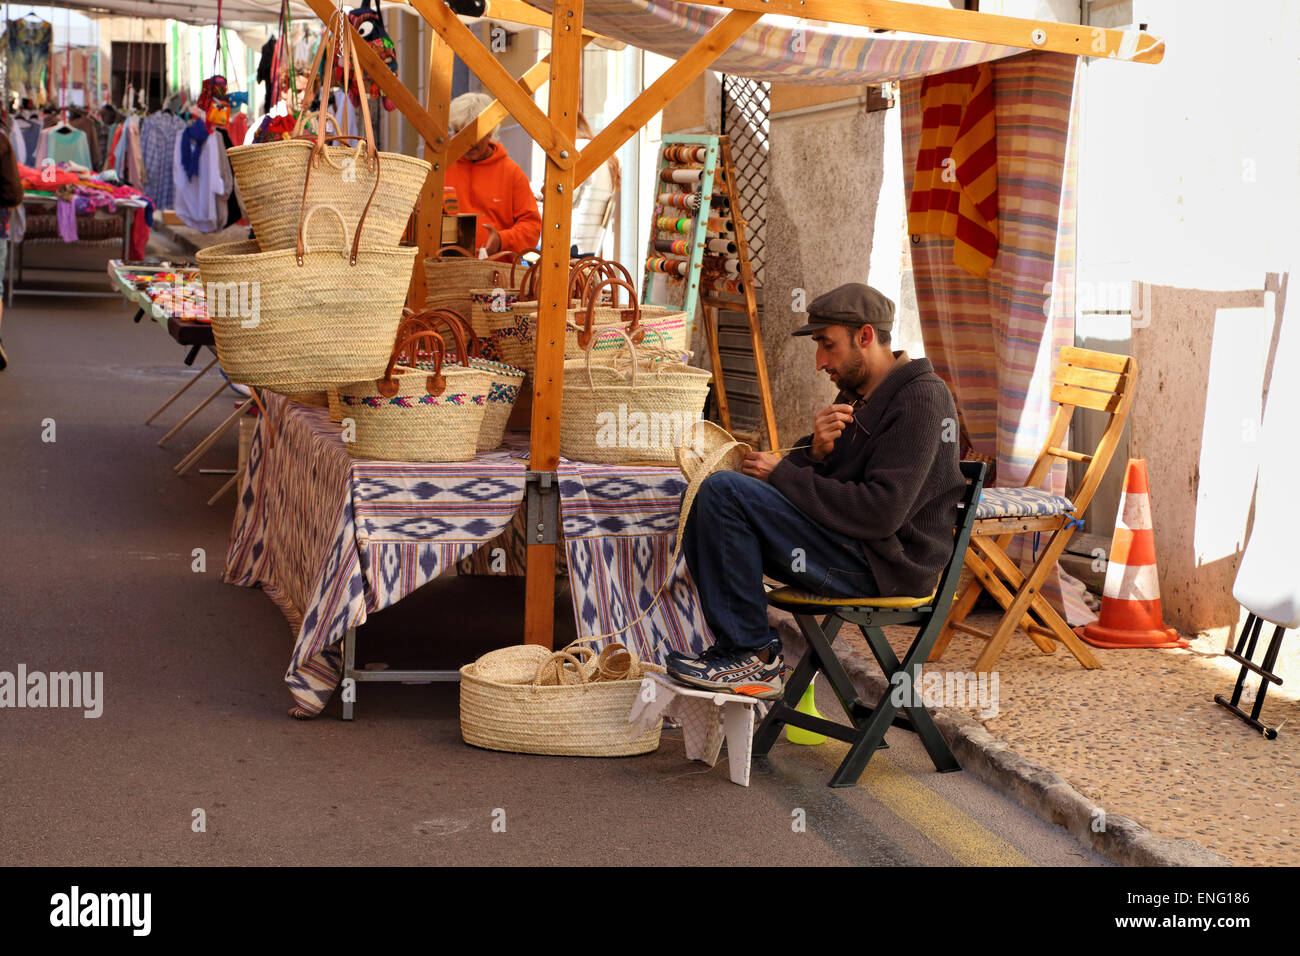 Craft of basket making from palm leaves (Obra de llatra) at a handicrafts street market in Capdepera, Mallorca, Spain Stock Photo